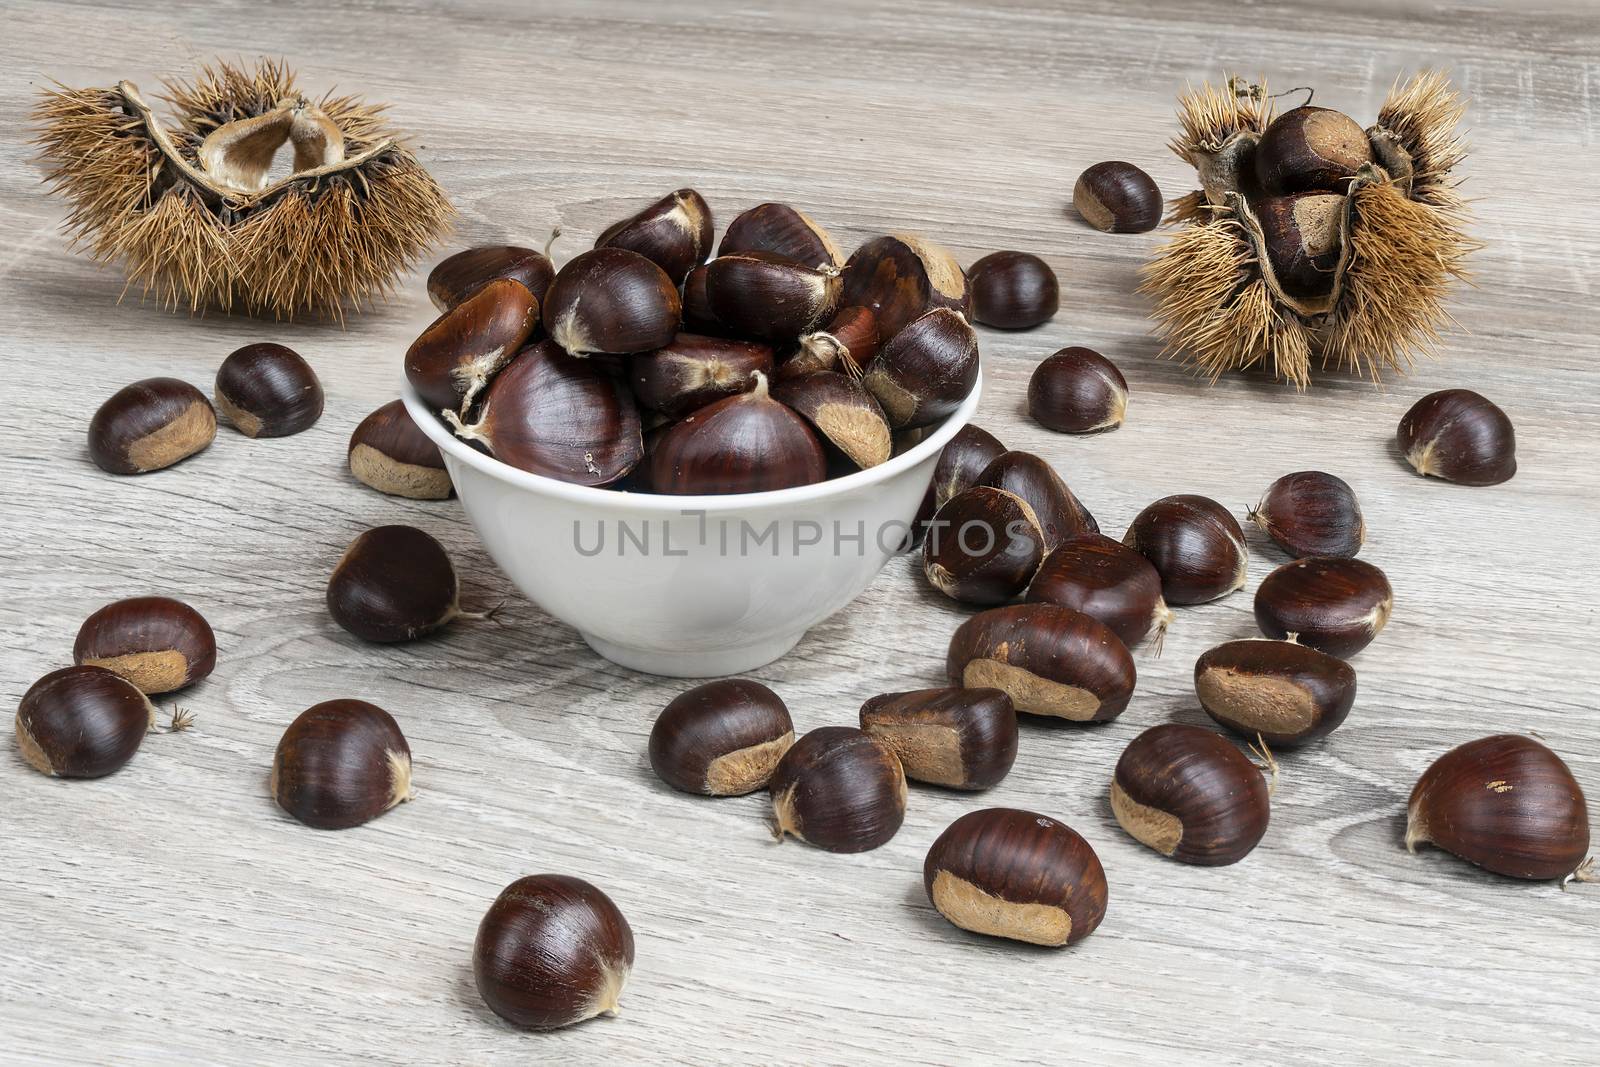 Chestnuts in autumn by sergiodv